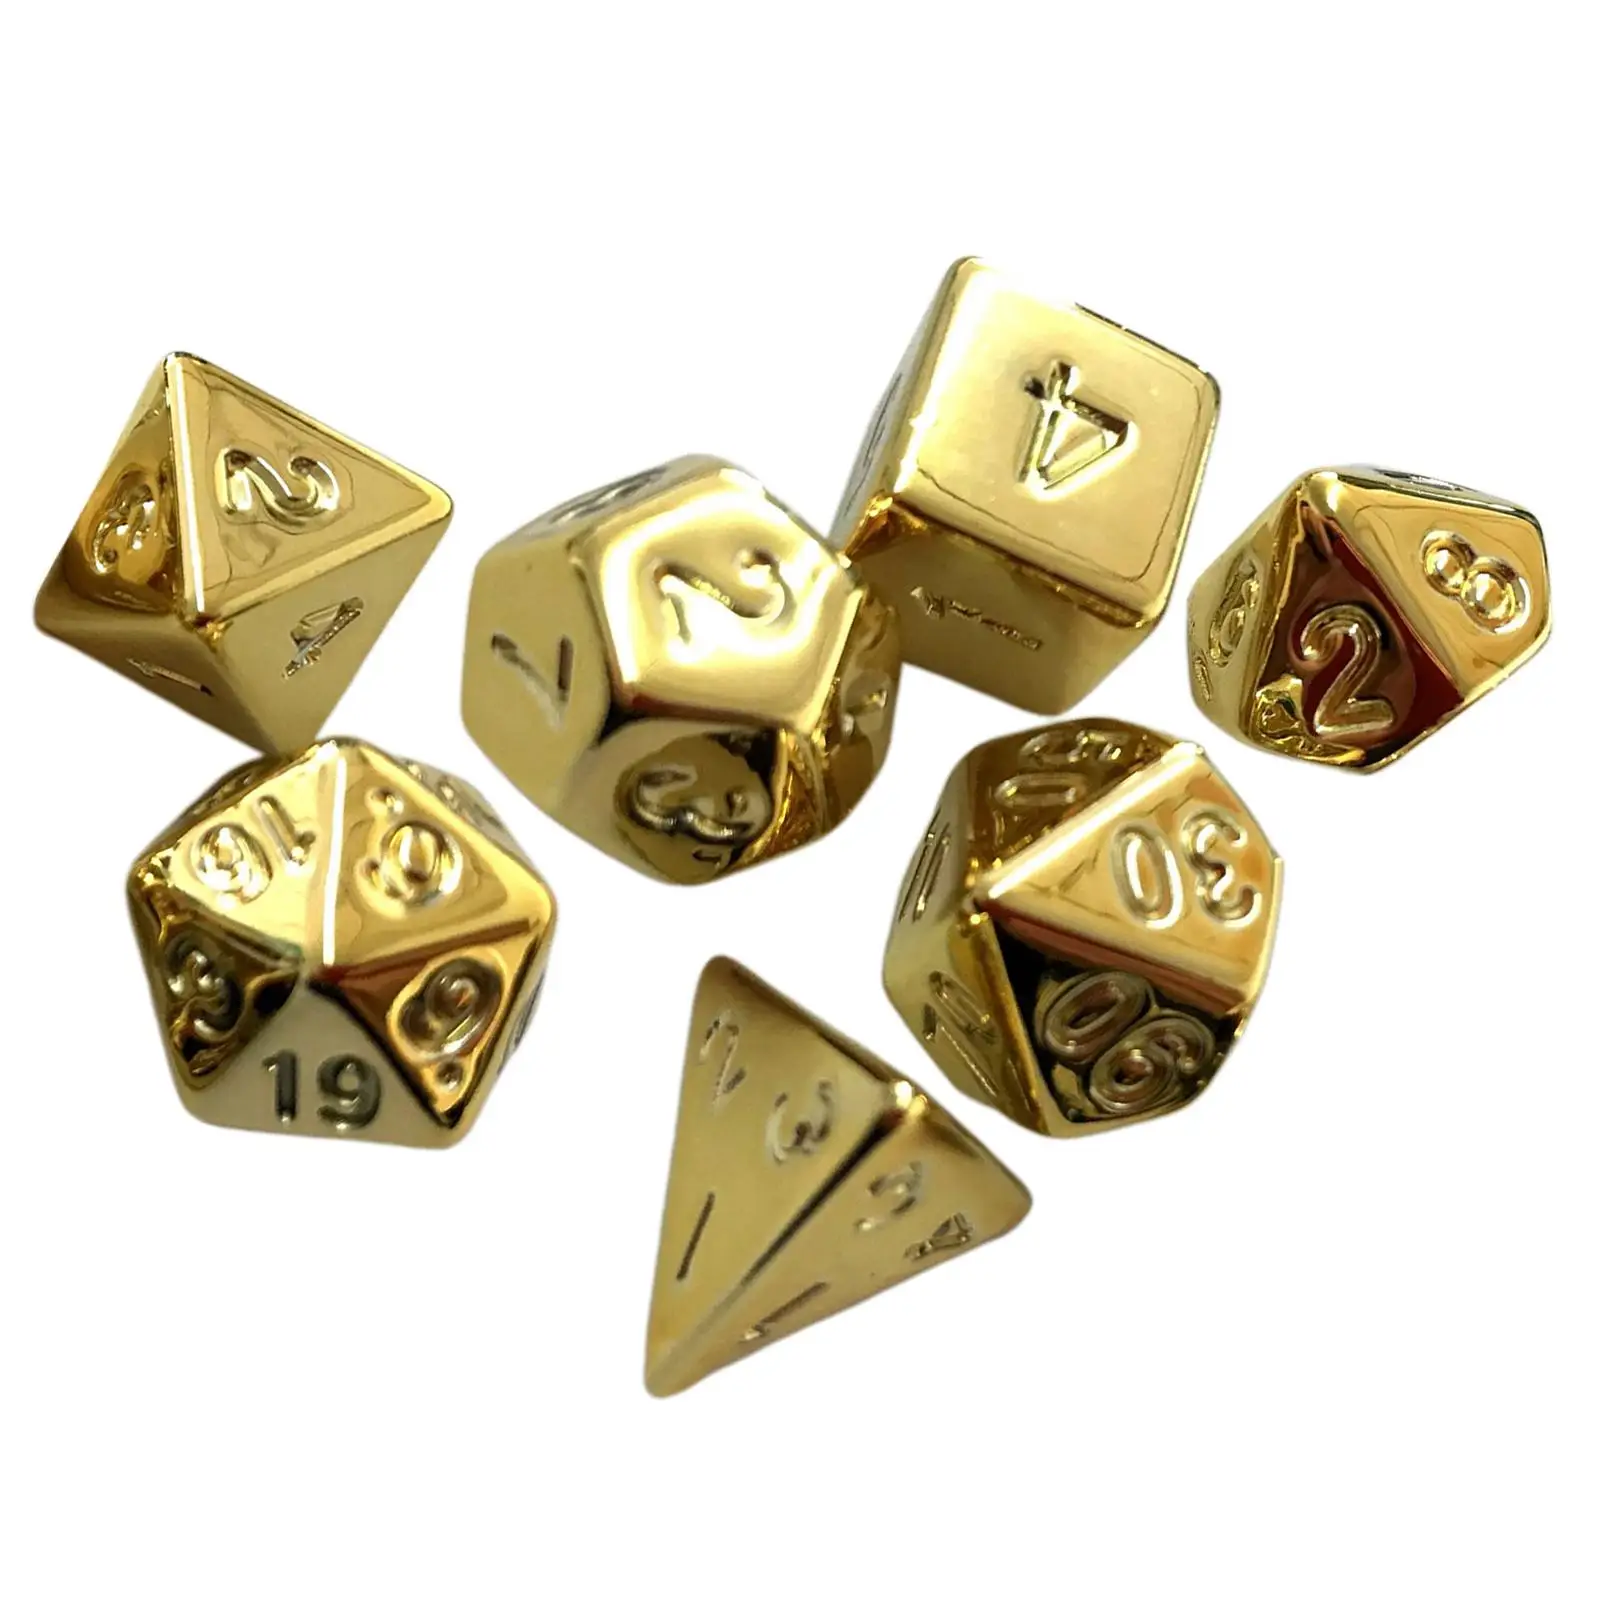 7x Multi Sided Dices Party Favors Entertainment Toys D4-d20 Polyhedral Dices Set for Card Game Board Game Table Games Party Game